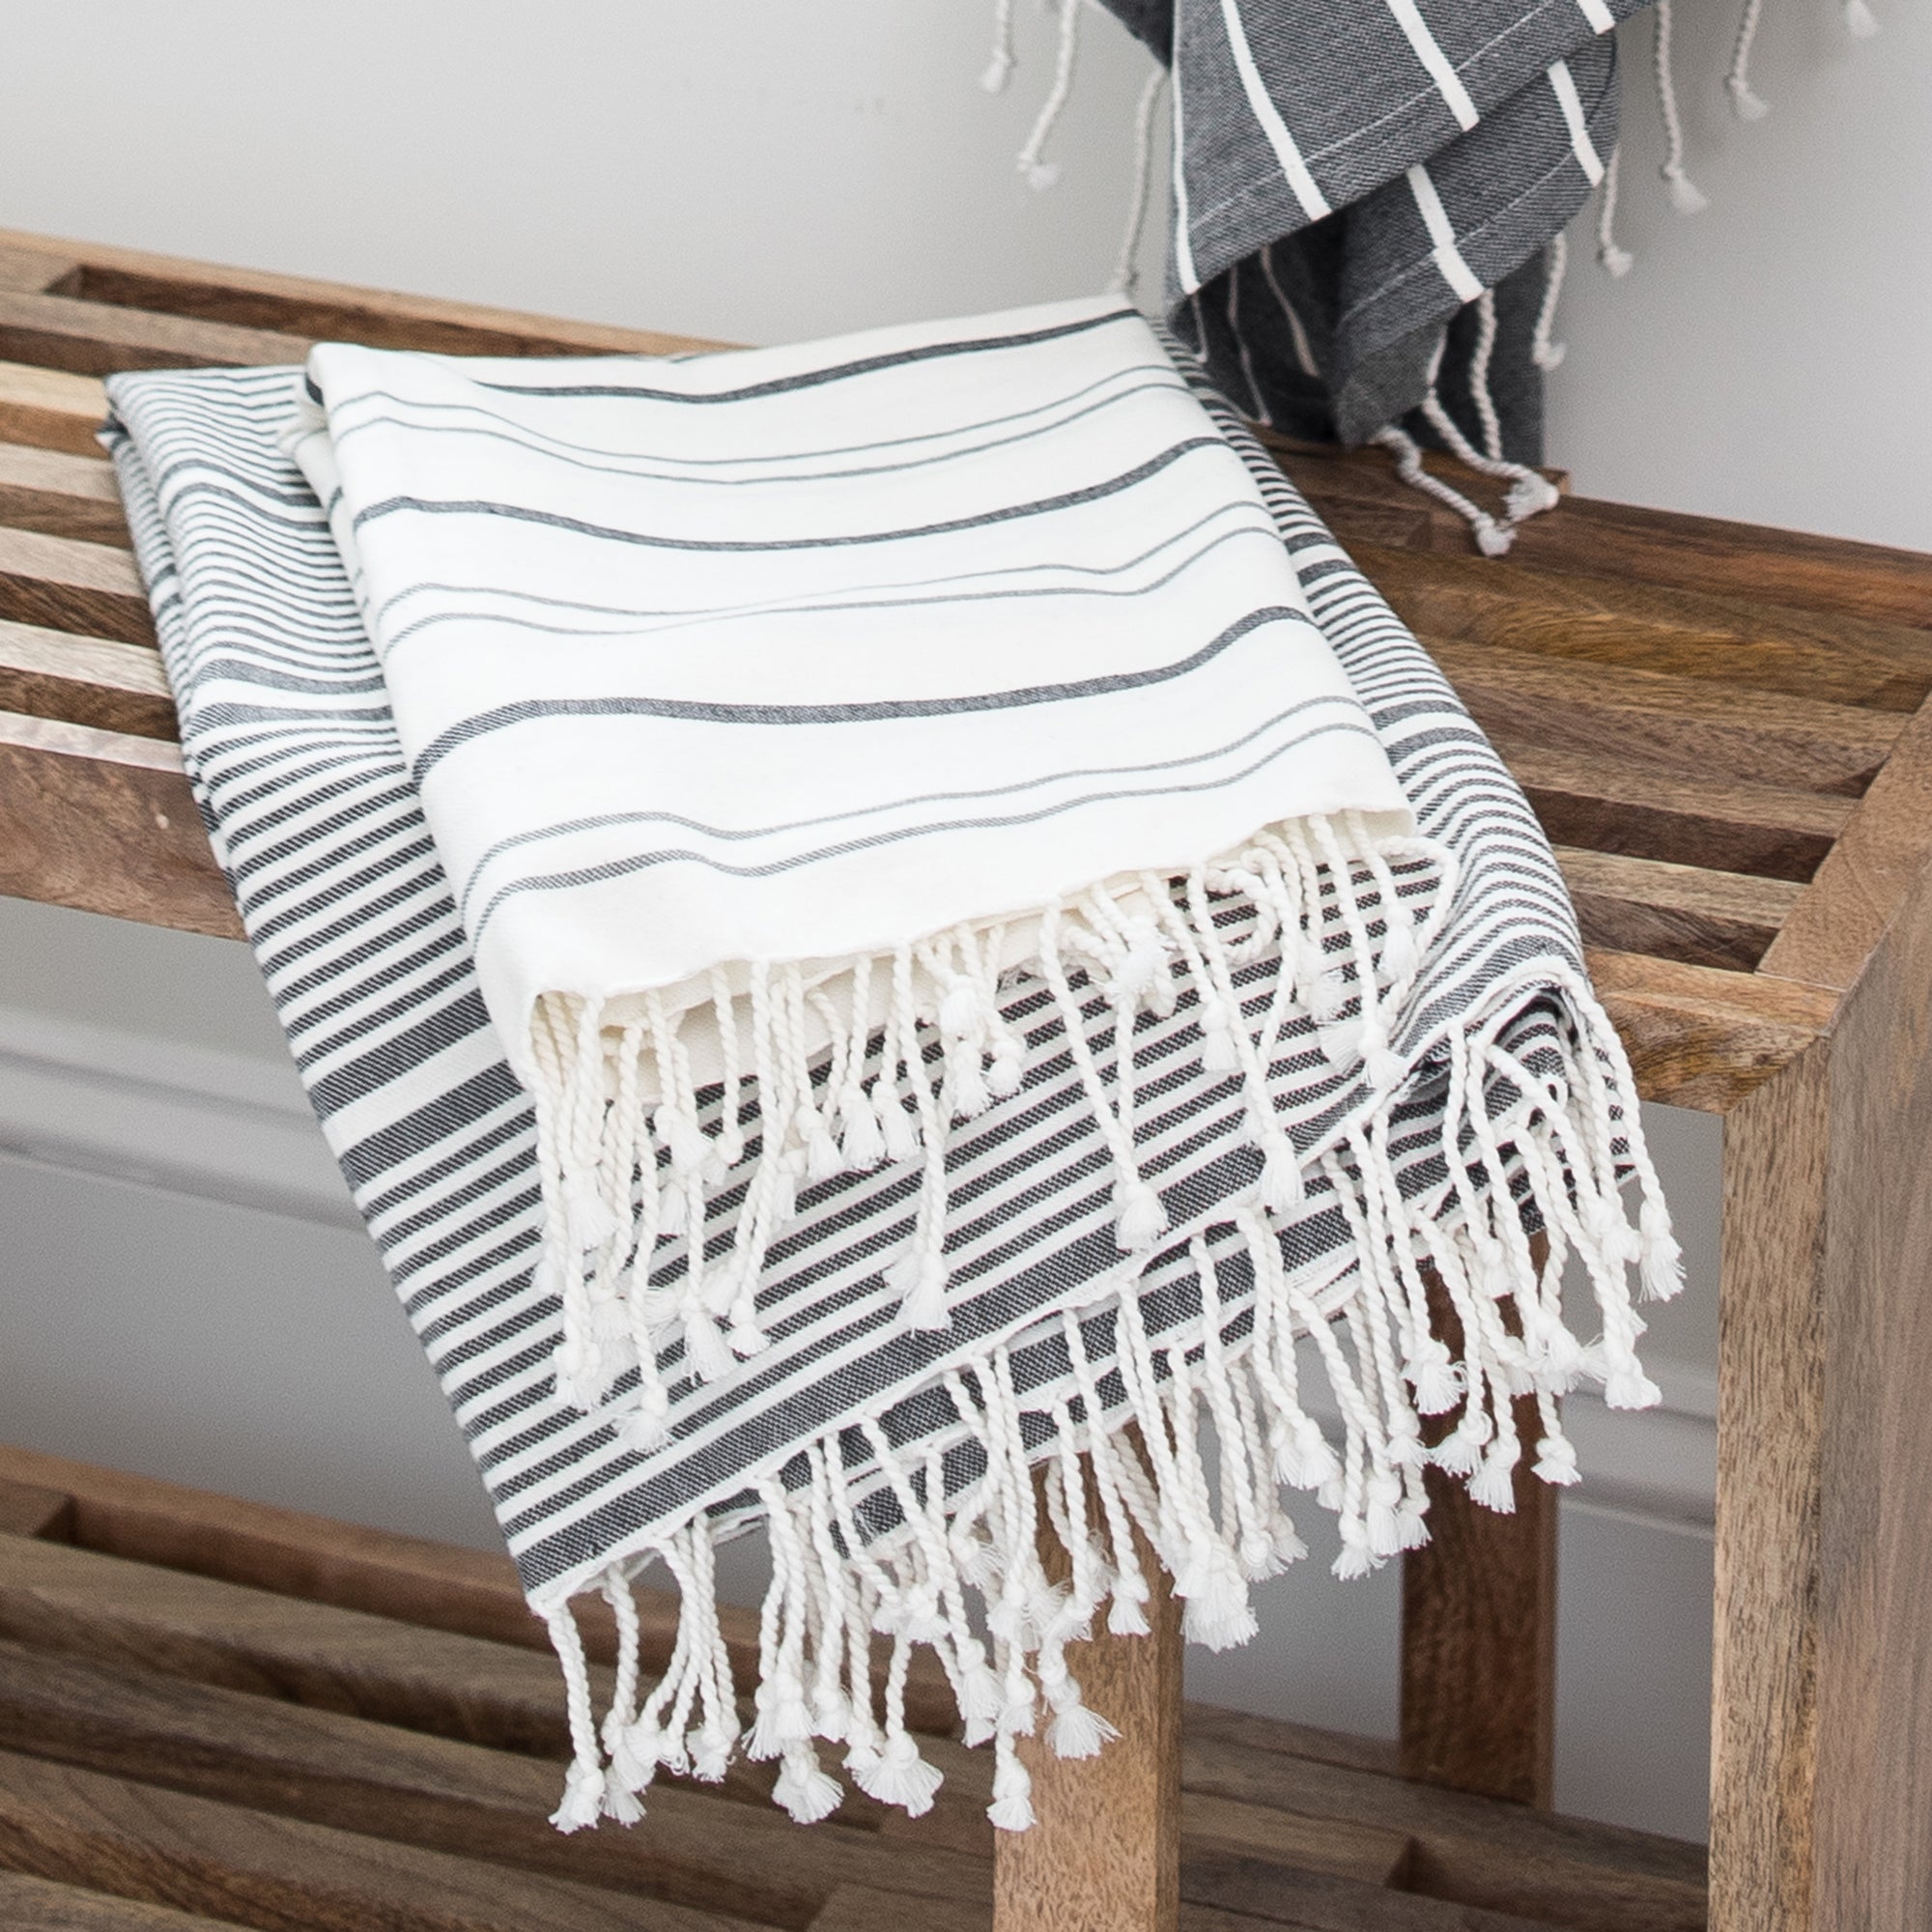 Your Summer Multitasking Accessory: 6 Ways to Use a Fouta Towel